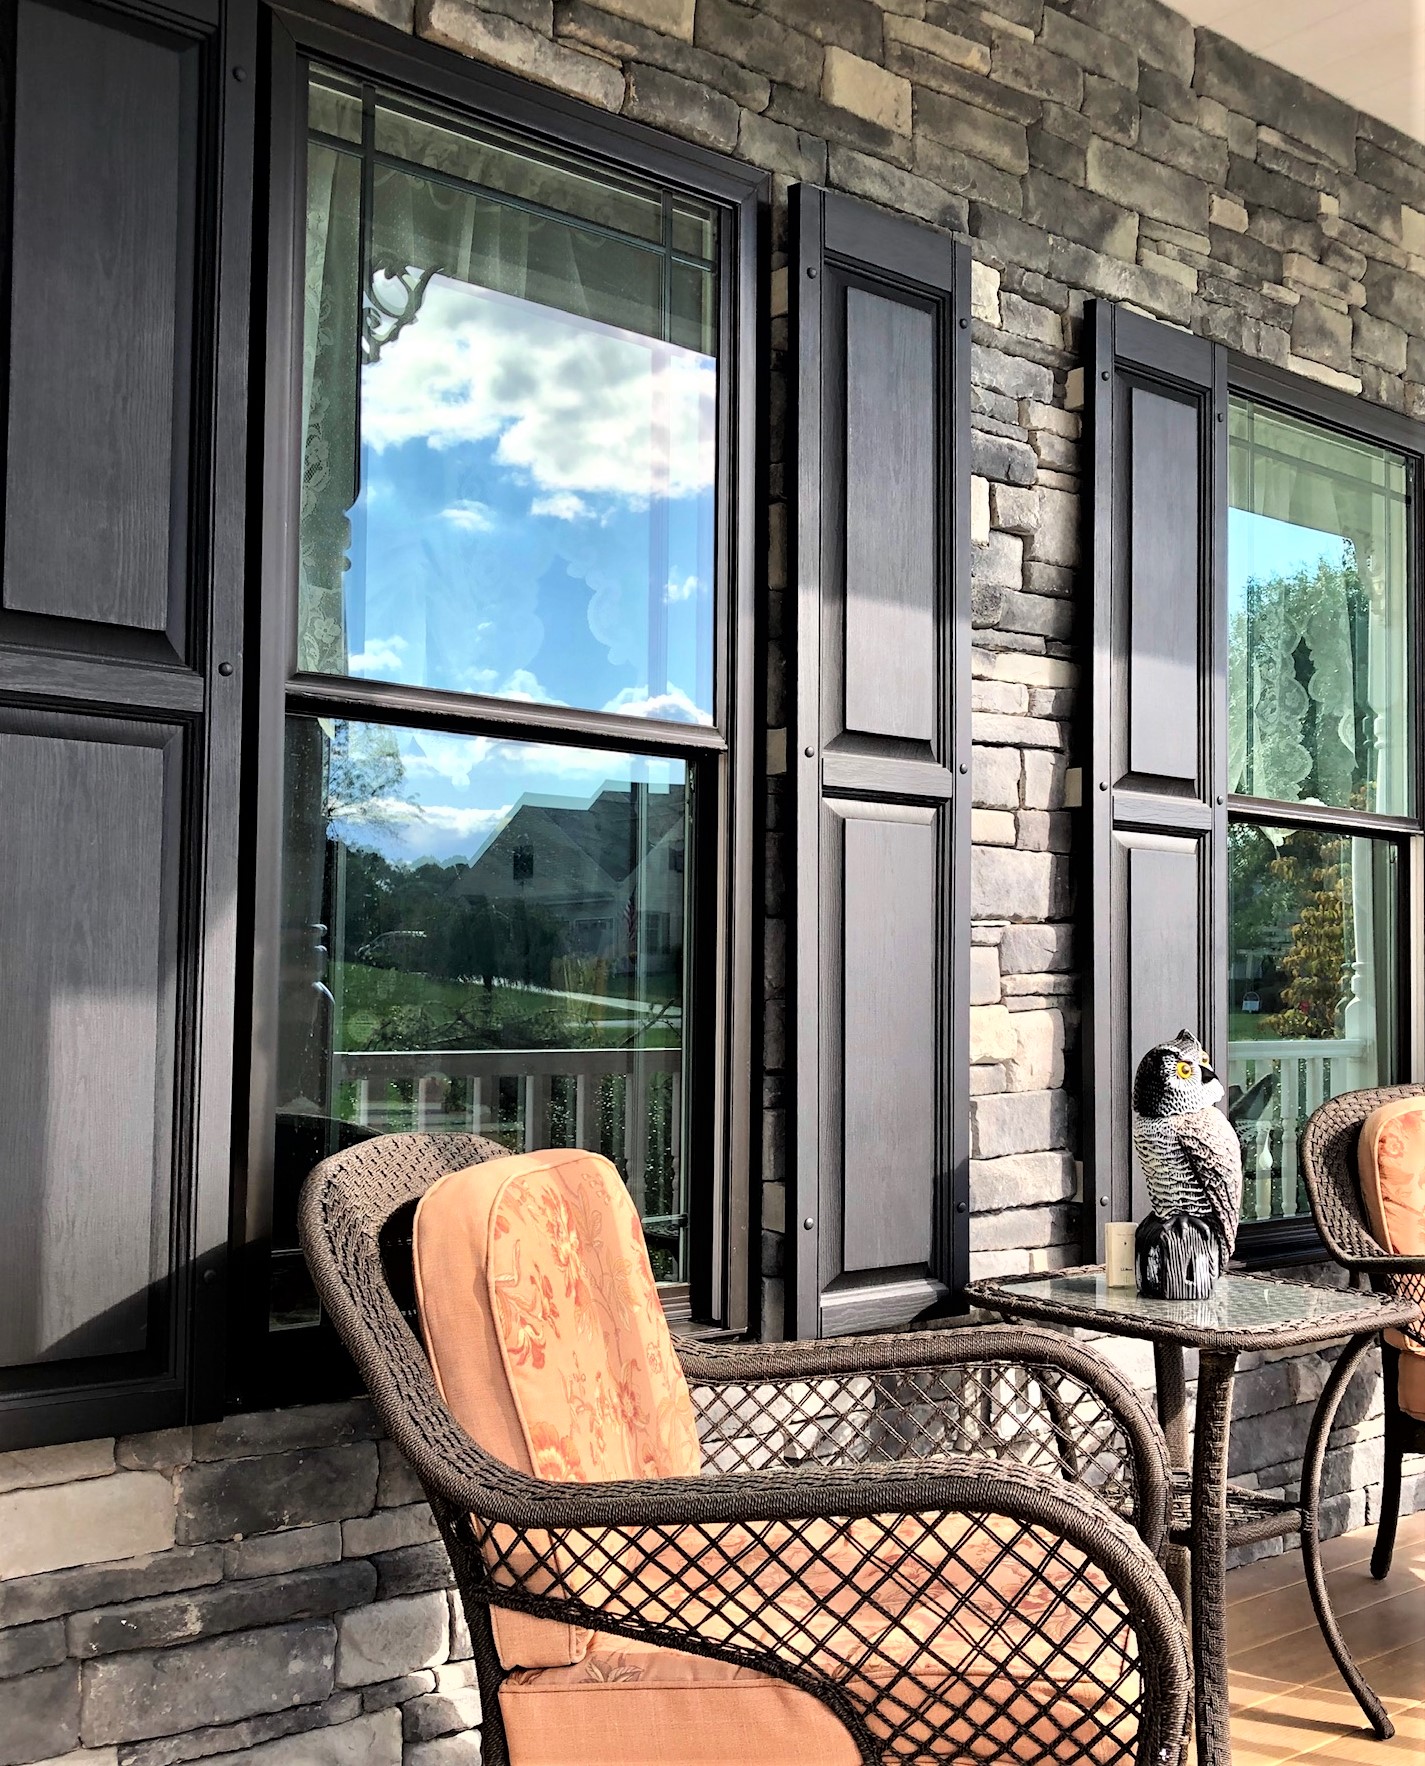 New windows with black shutters against a stone exterior